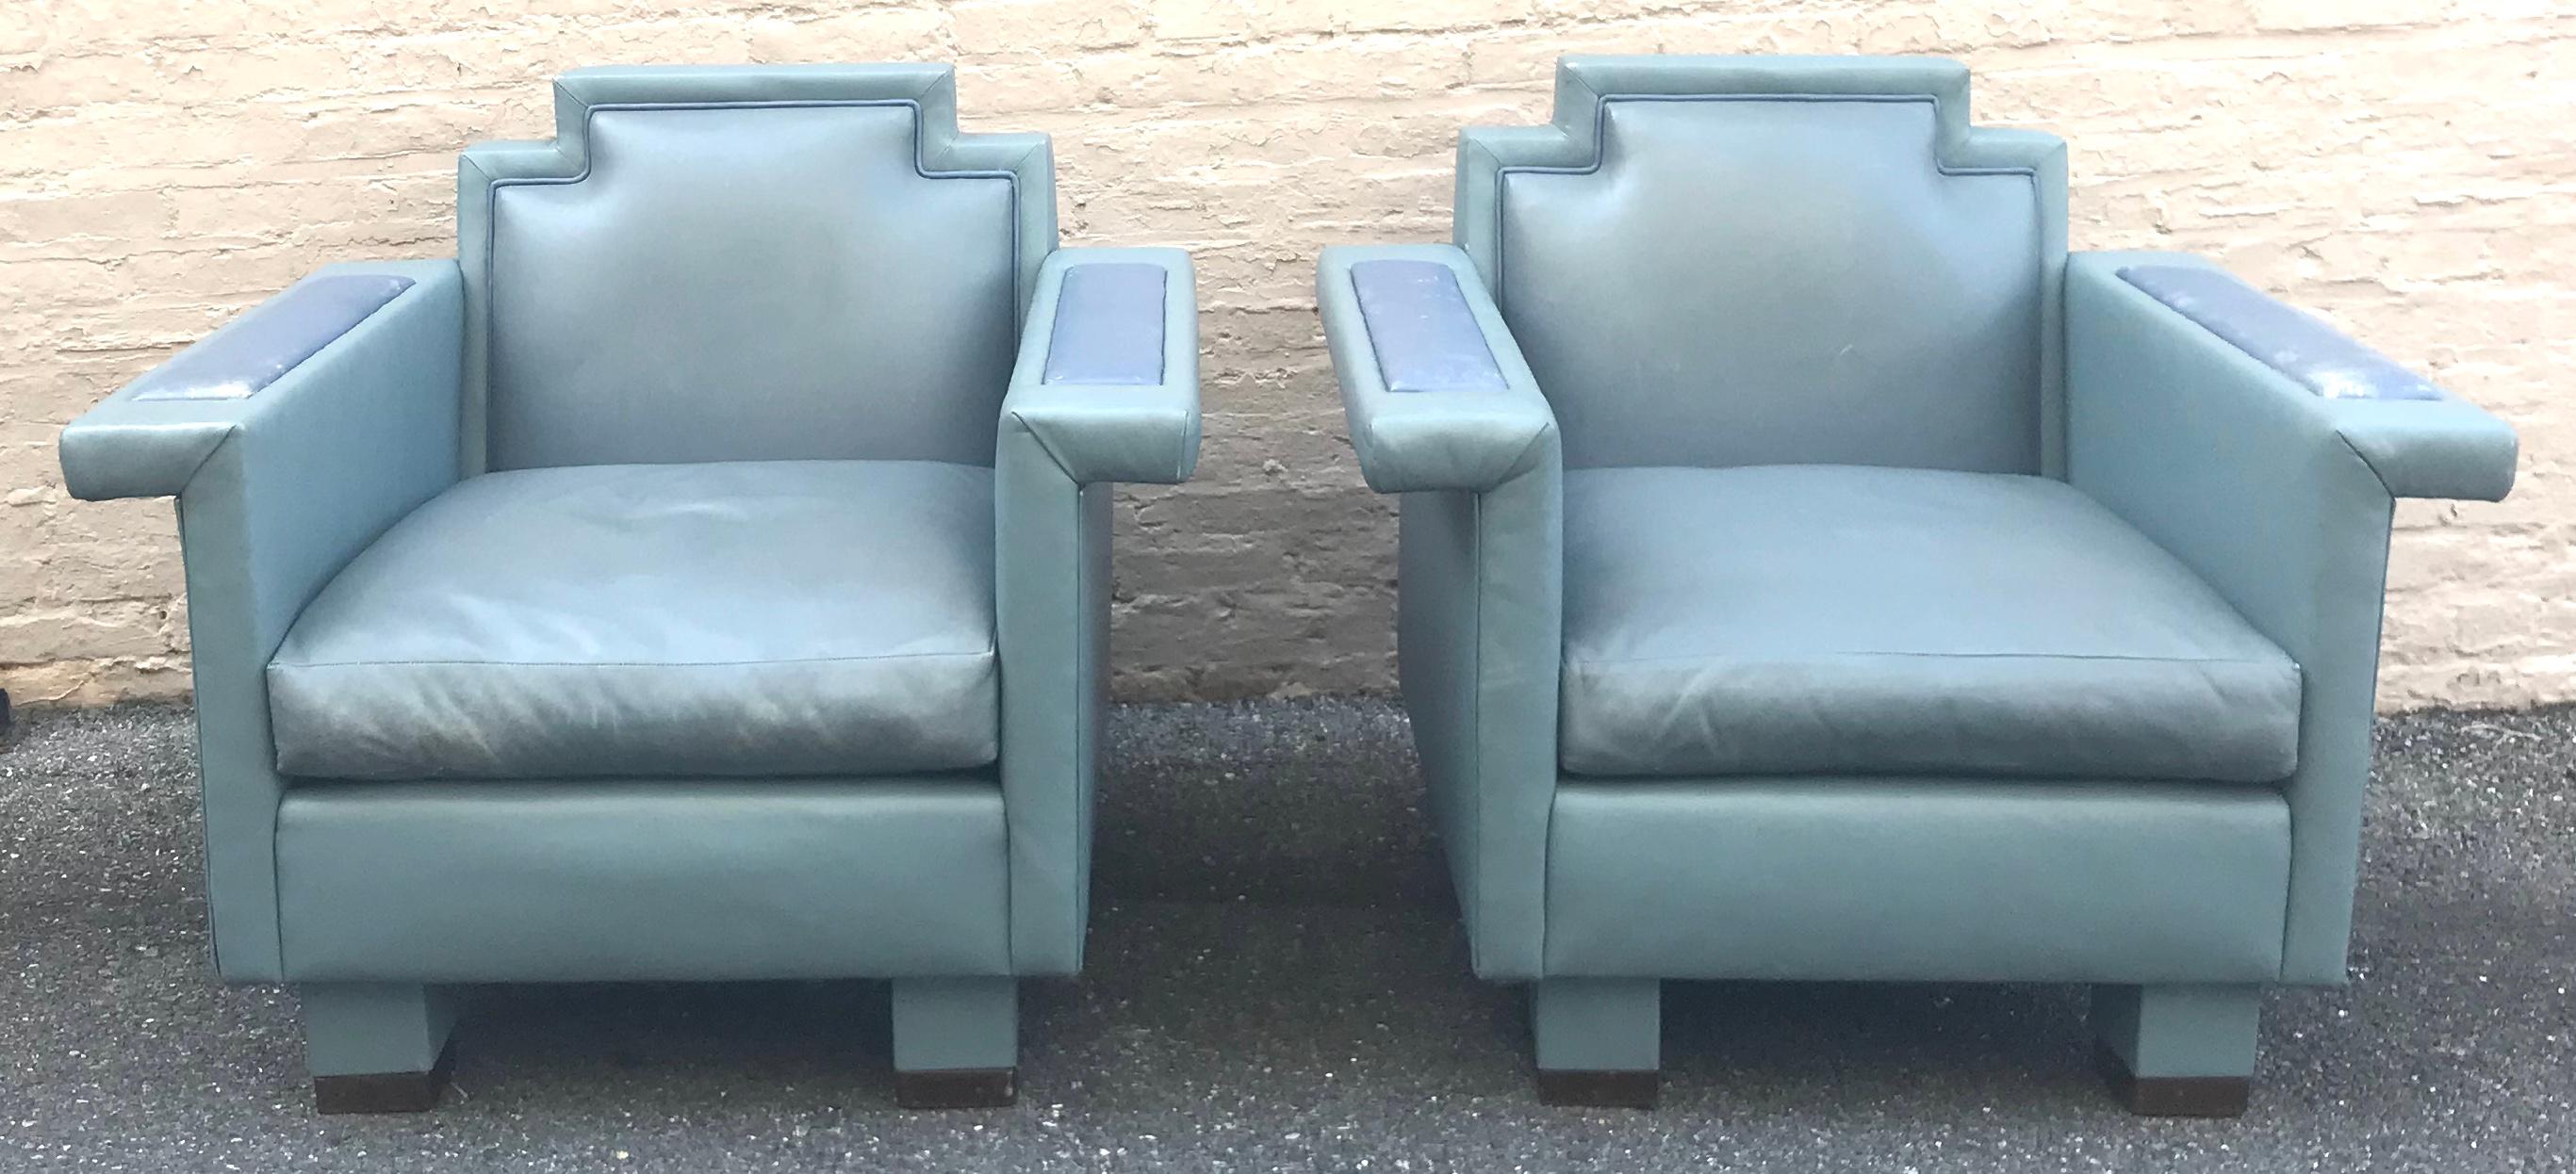 Exceptional pair of blue-gray custom-made leather lounge chairs designed by Ronn Jaffe, circa 1985. These have a wonderful Postmodern, slightly Memphis vibe to them, with unparalleled craftsmanship and quality. They’re also extremely comfortable!